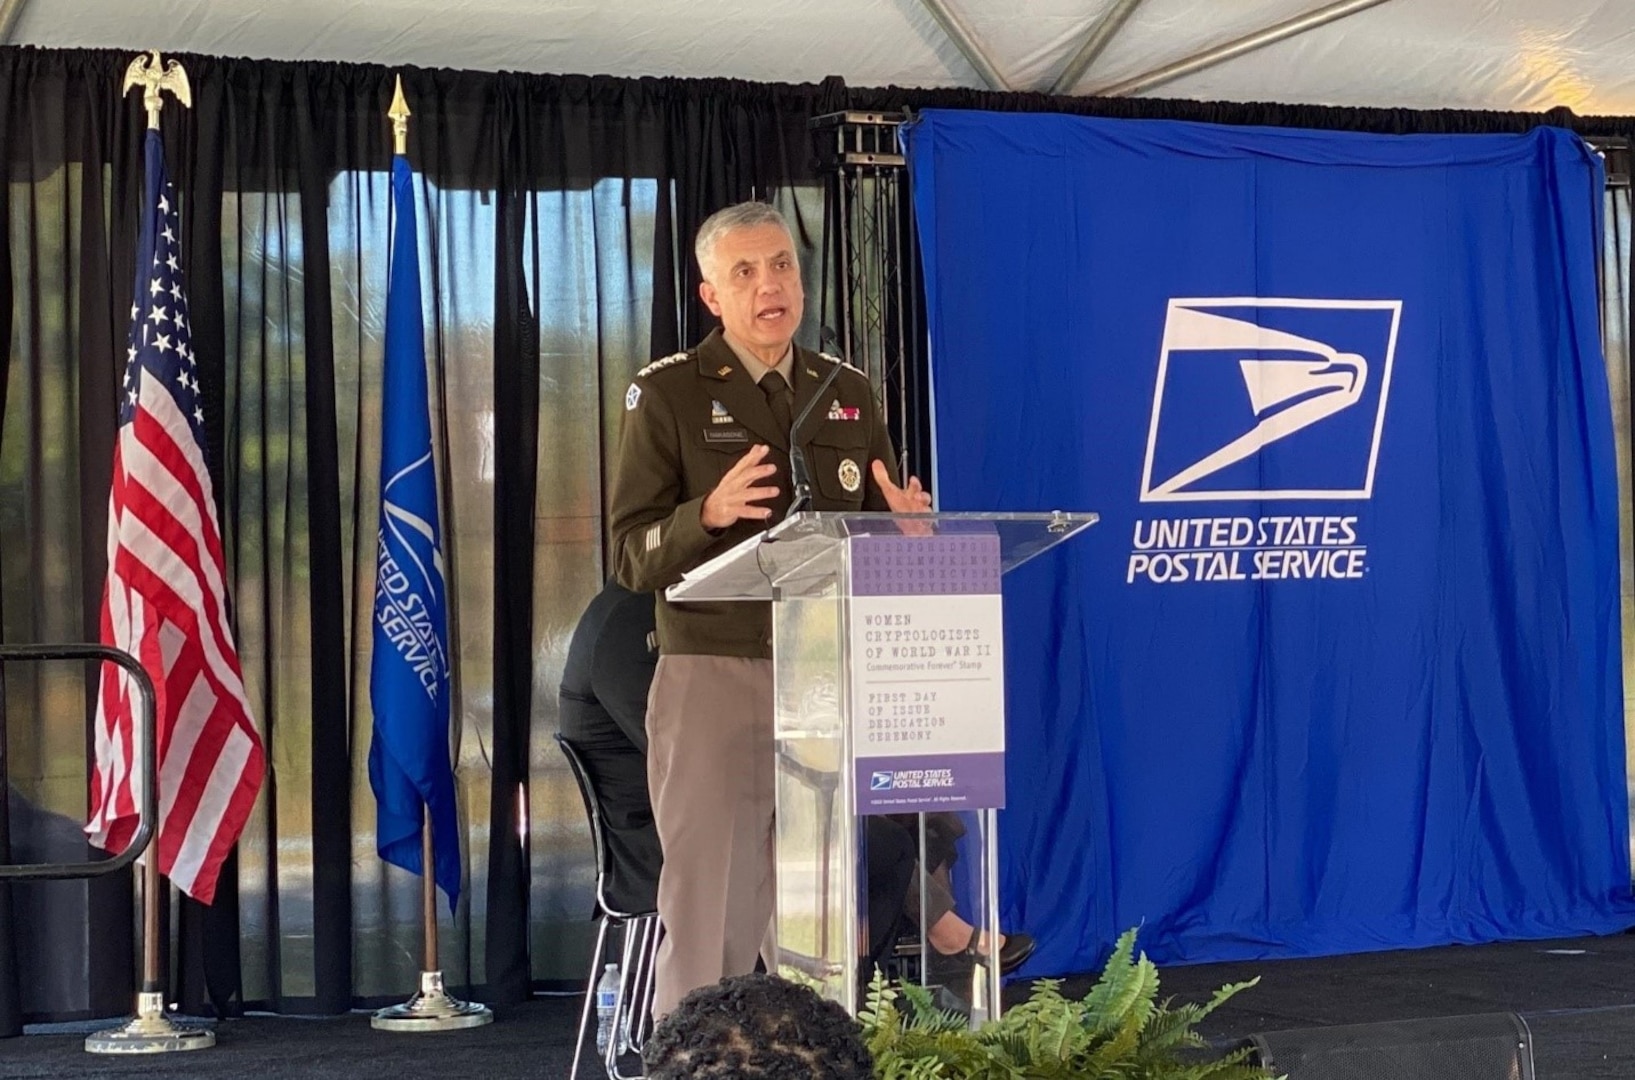 GEN Nakasone delivers remarks during the first-day-of-issue ceremony for the Women Cryptologists of World War II Forever stamp on October 18, 2022 at the National Cryptologic Museum.